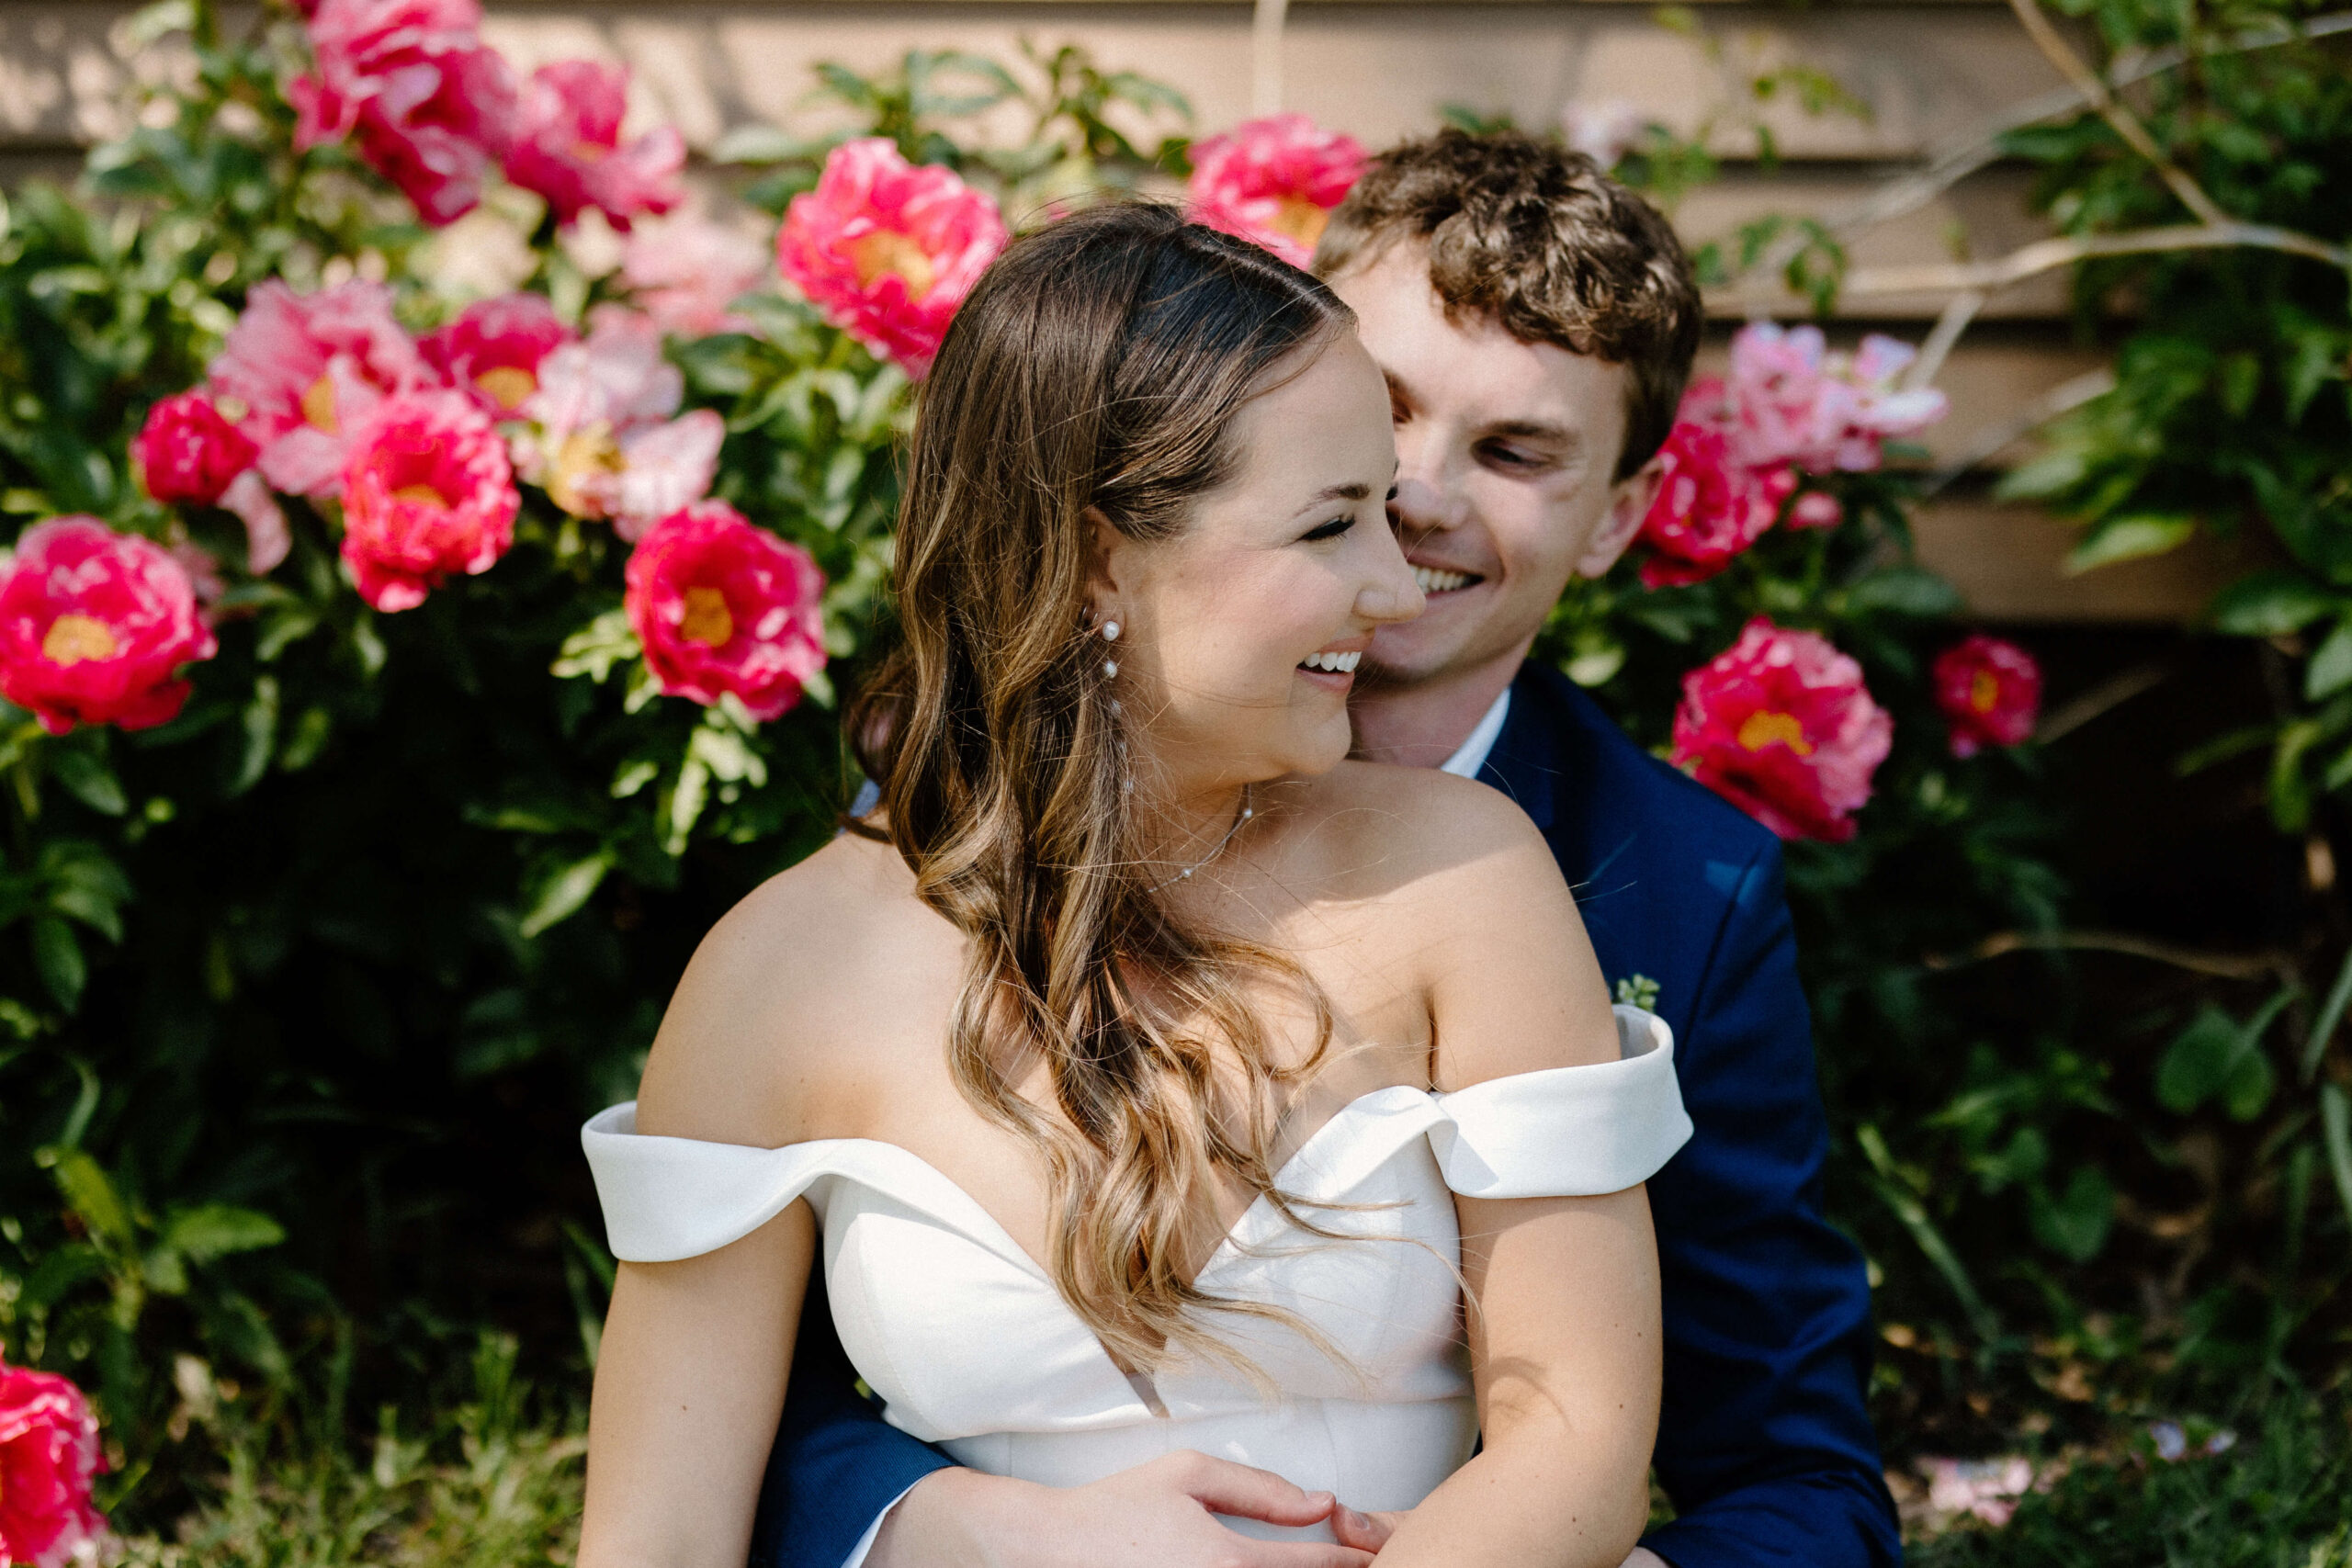 Documentary-style photographer captures couple sitting in front of bright pink peonies on their wedding day